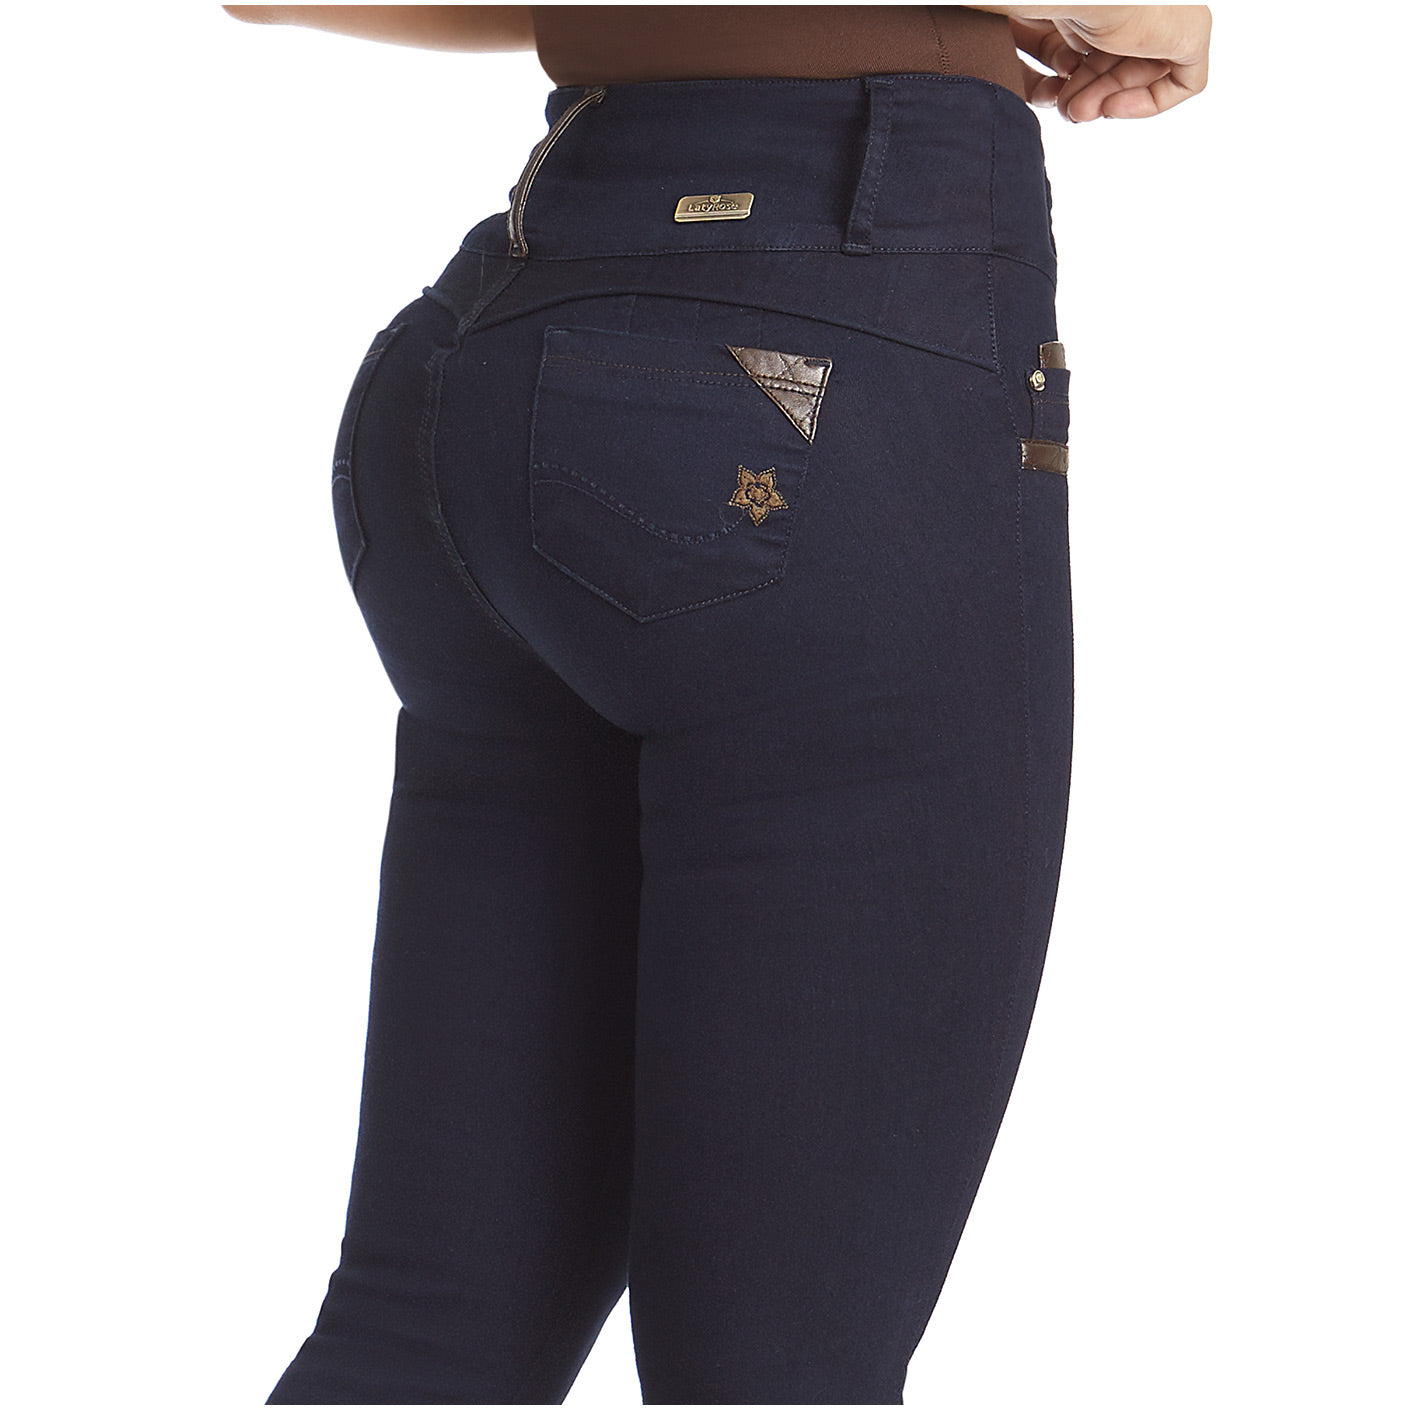 LT.Rose IS3B02 | COLOMBIAN JEANS | NATURAL BUTT LIFTING JEANS